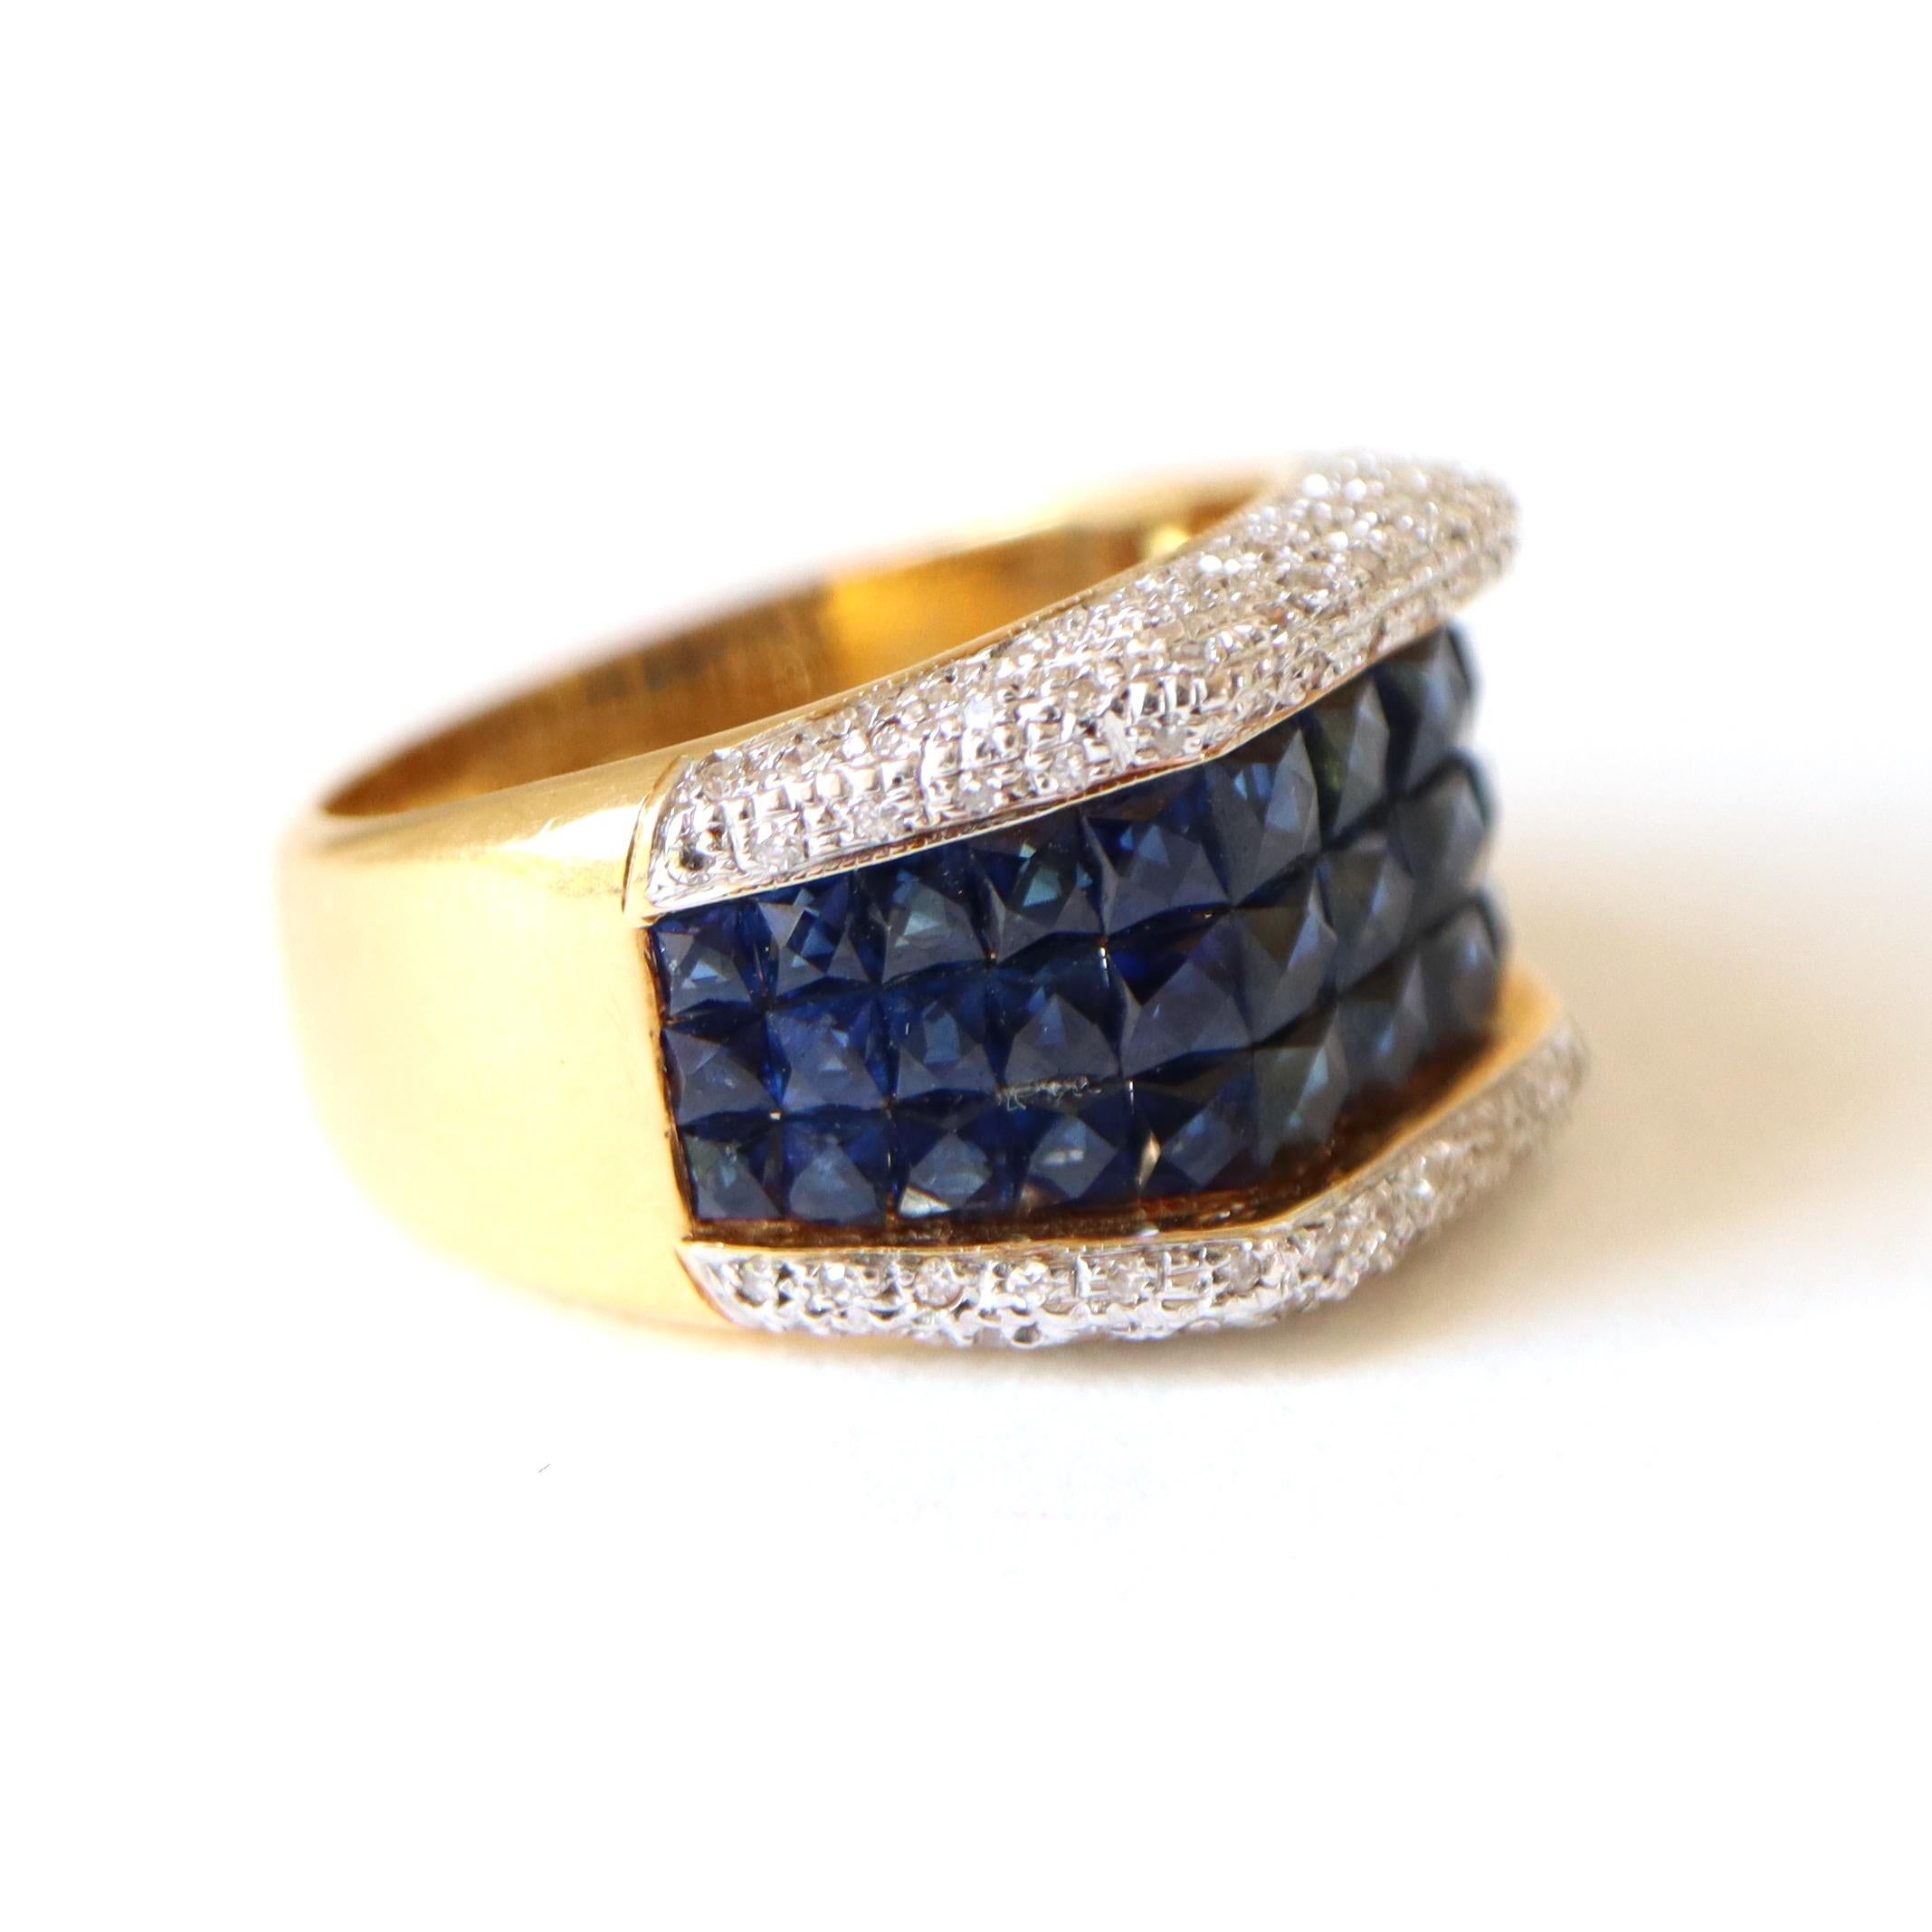 Jarretière ring in 18 kt yellow gold set with 39 calibrated sapphires for a total weight of approximately 8 carats (7.99) in a mysterious invisible setting framed by an 18 kt white gold ring on either side set with brilliant-cut diamonds for 0.41